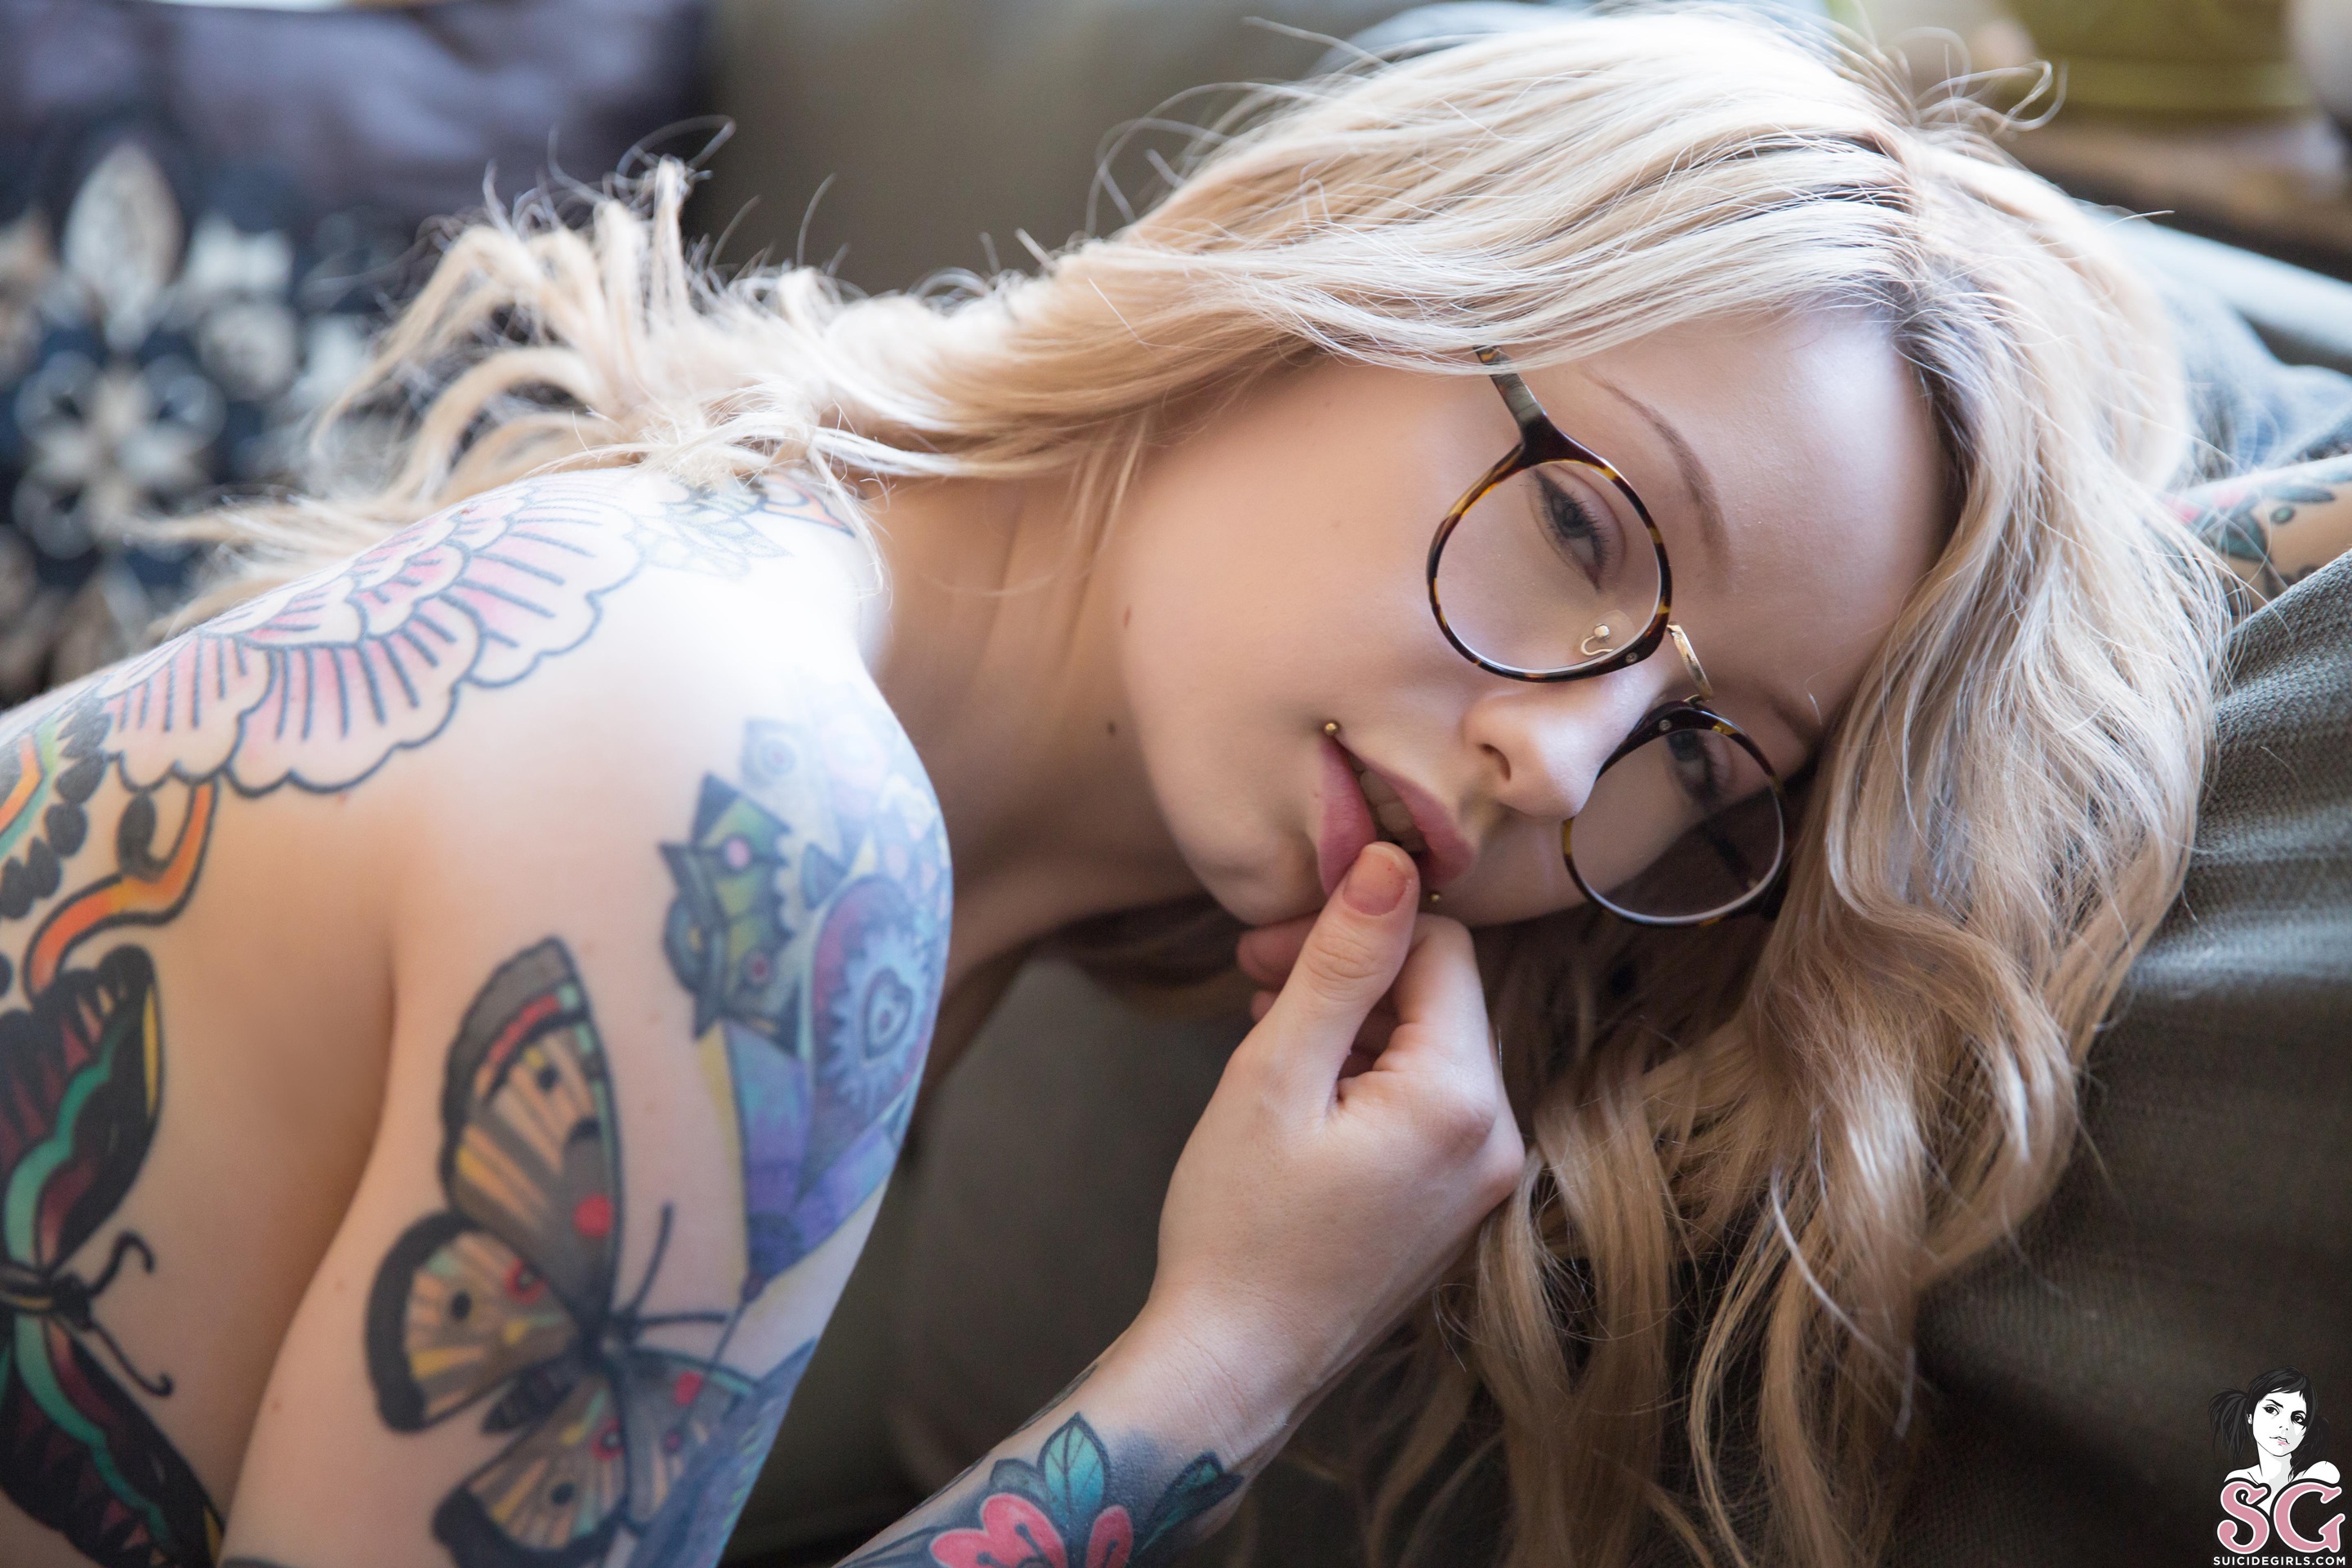 Girls bae suicide 33 Most